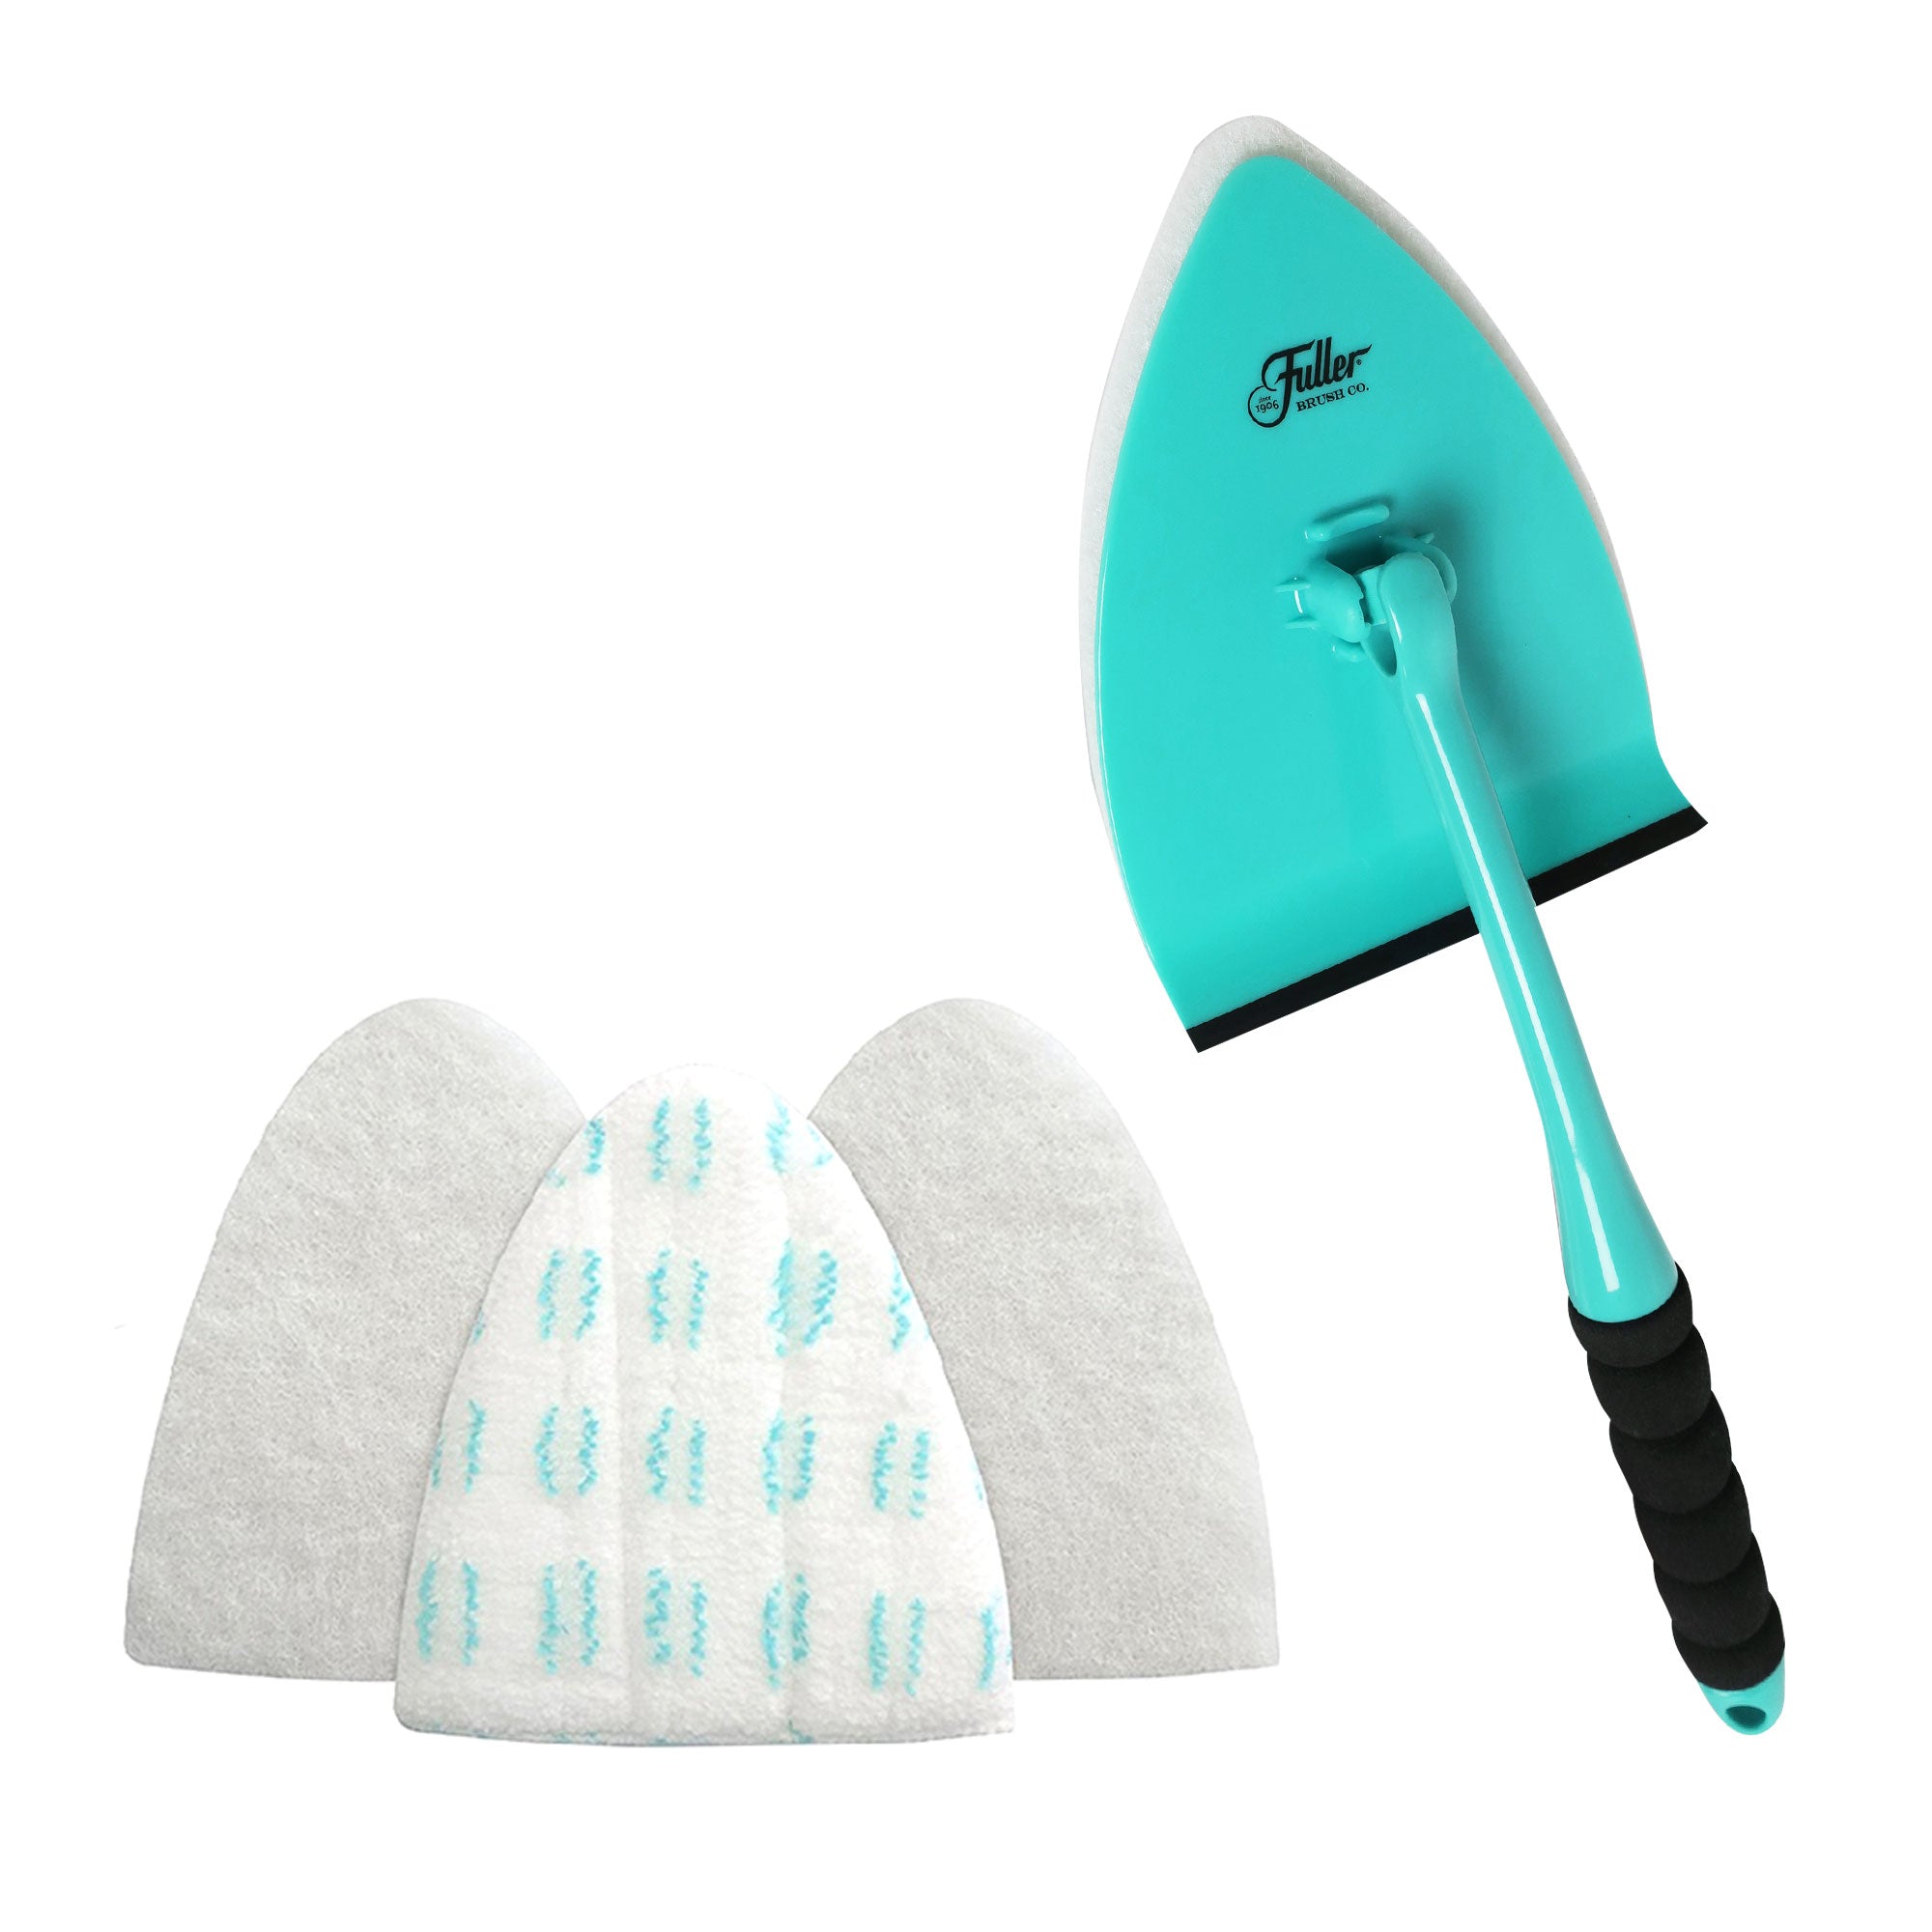 Ammoniated Window Cleaner with Big E-Z Scrubber